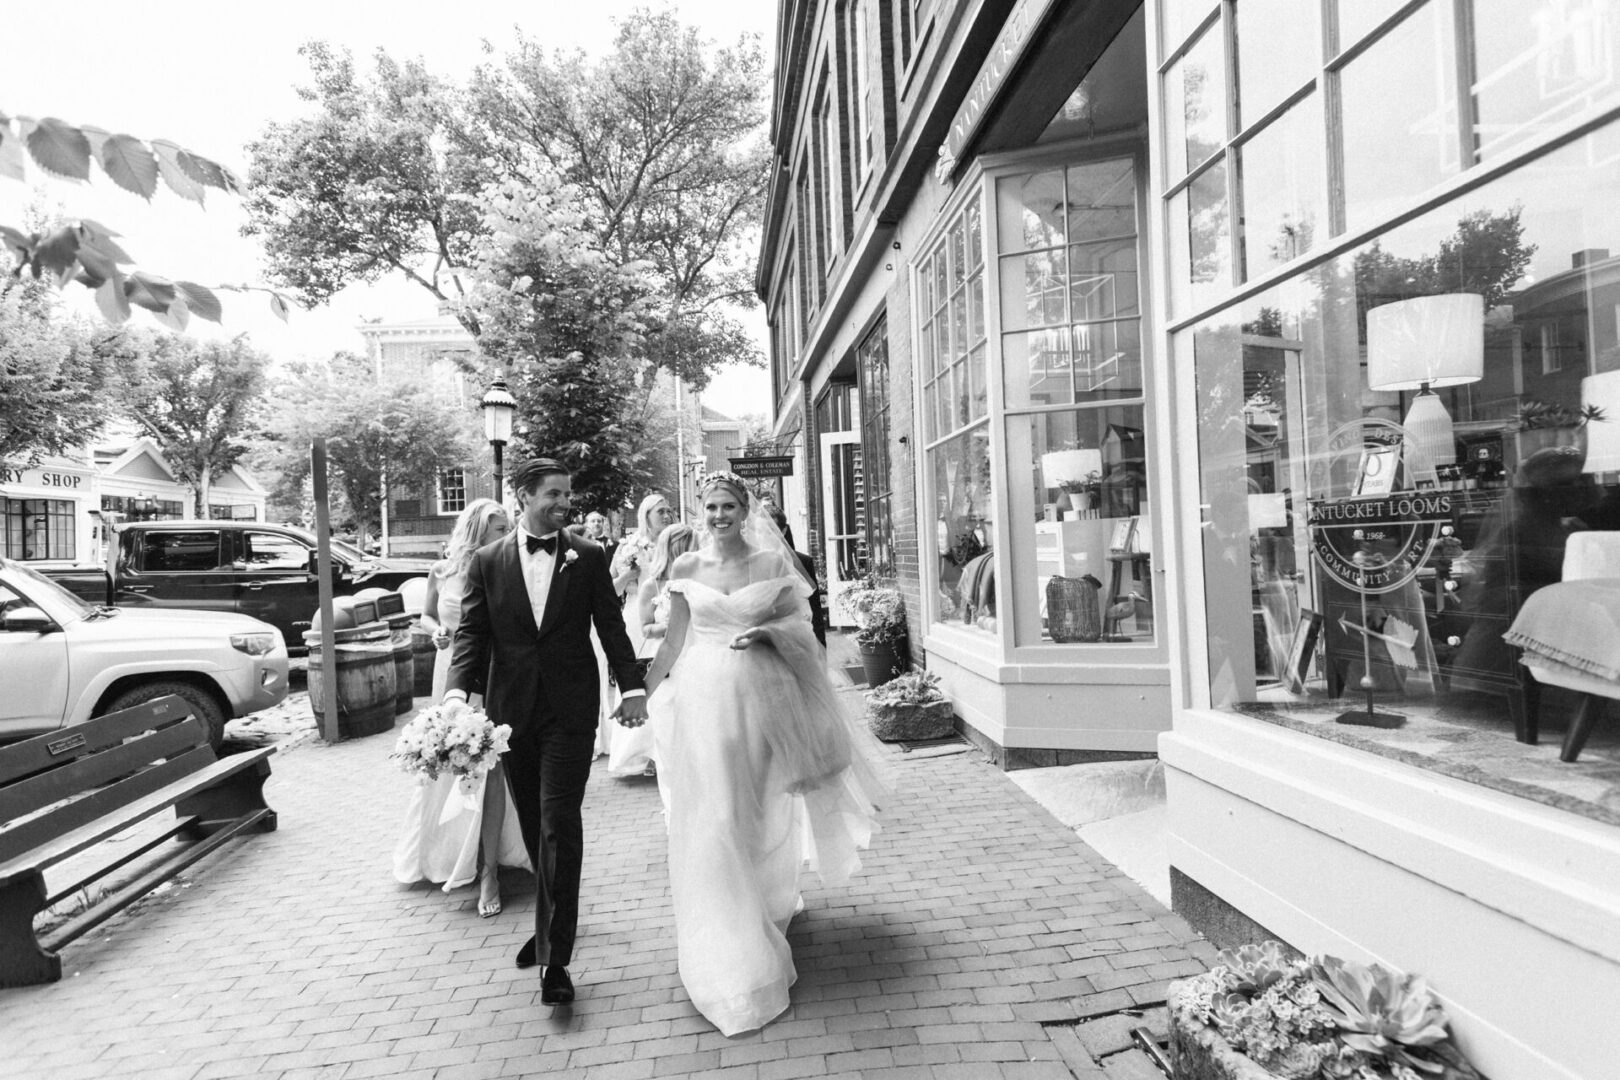 The bride and the groom take a stroll across the city